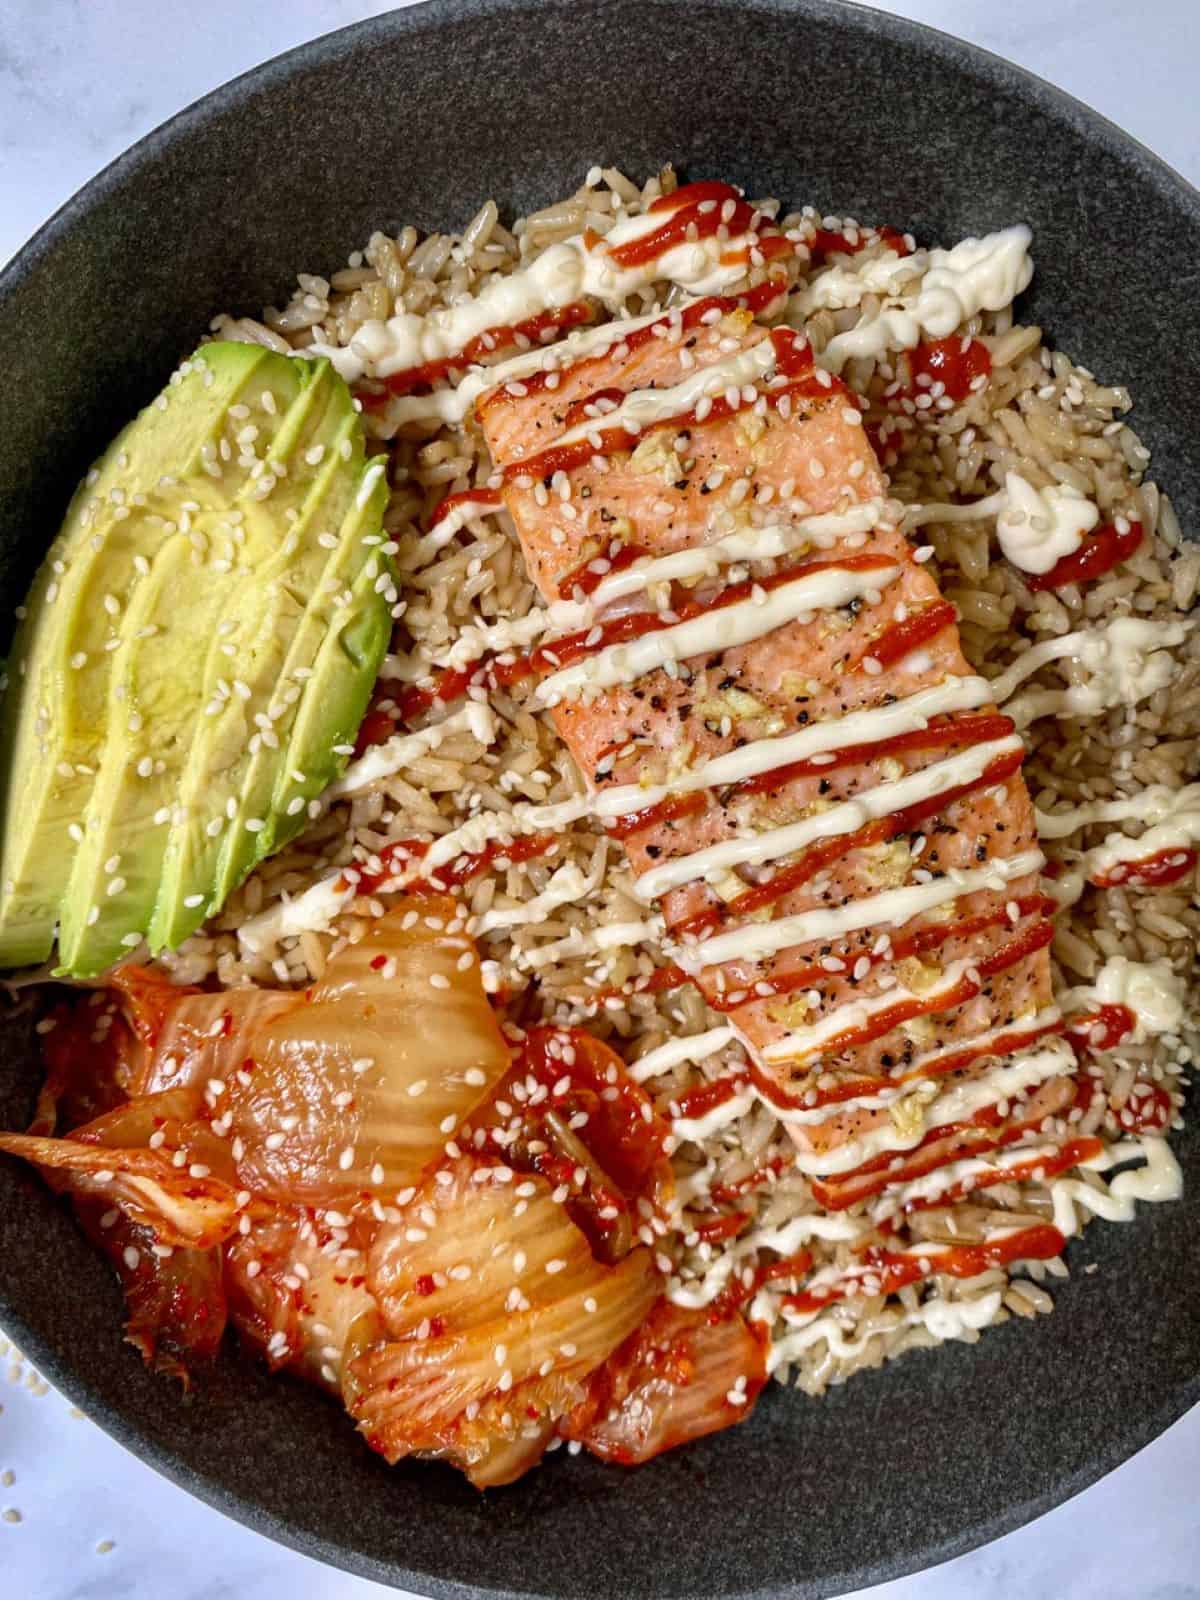 A bowl with salmon, rice, kimchi and avocado with a drizzle of mayo and siracha sauce.